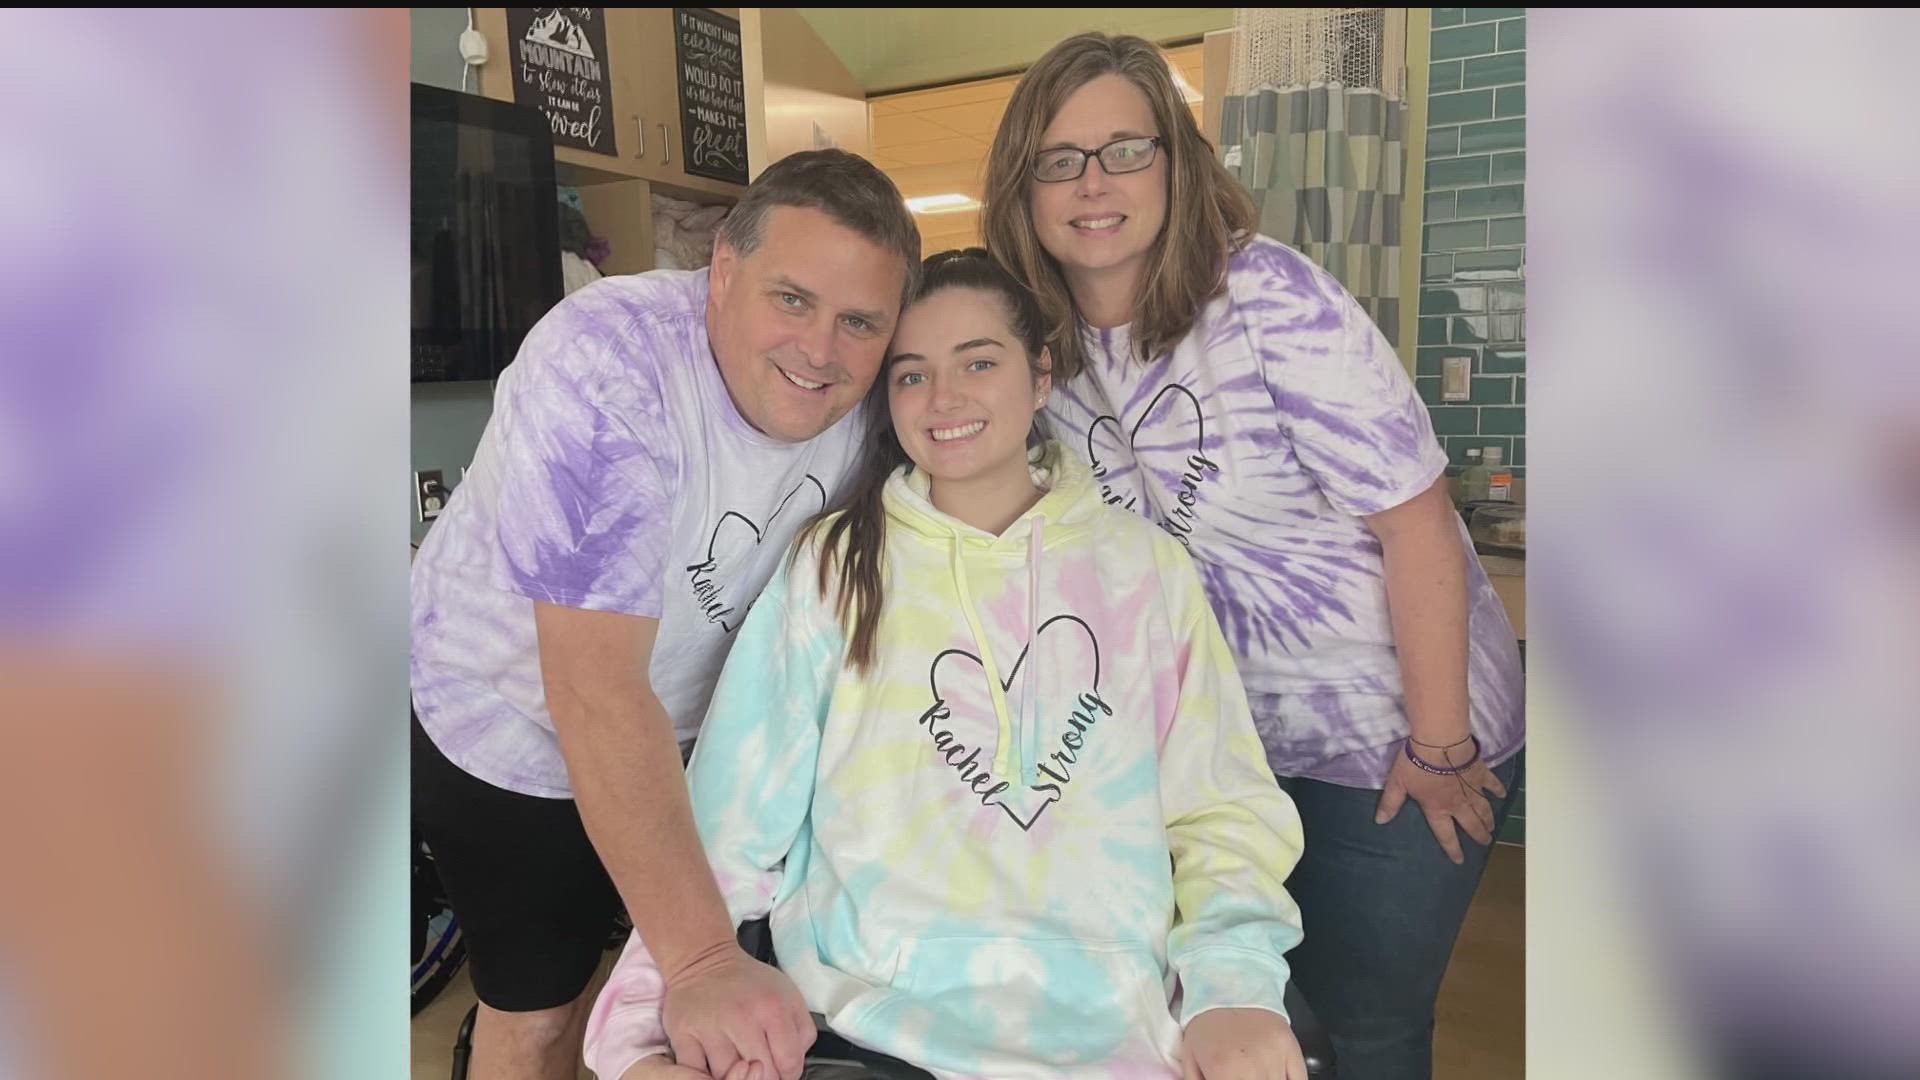 Through consistent therapy at Courage Kenny Rehabilitation Institute and family support, Rachel was able to defy the odds, even reaching one of her goals.